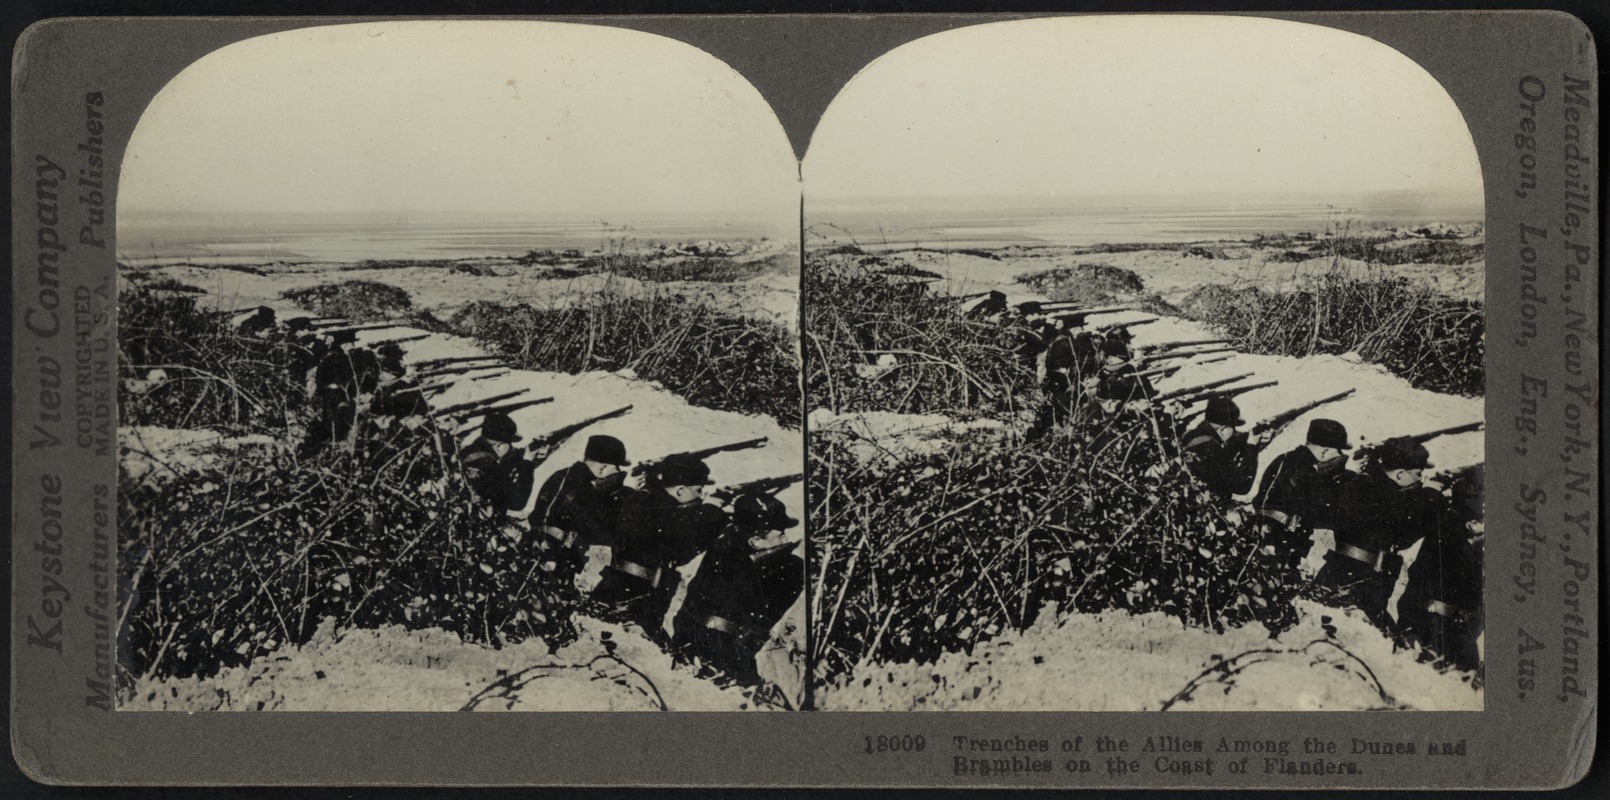 Trenches of the Allies on the coast of Flanders